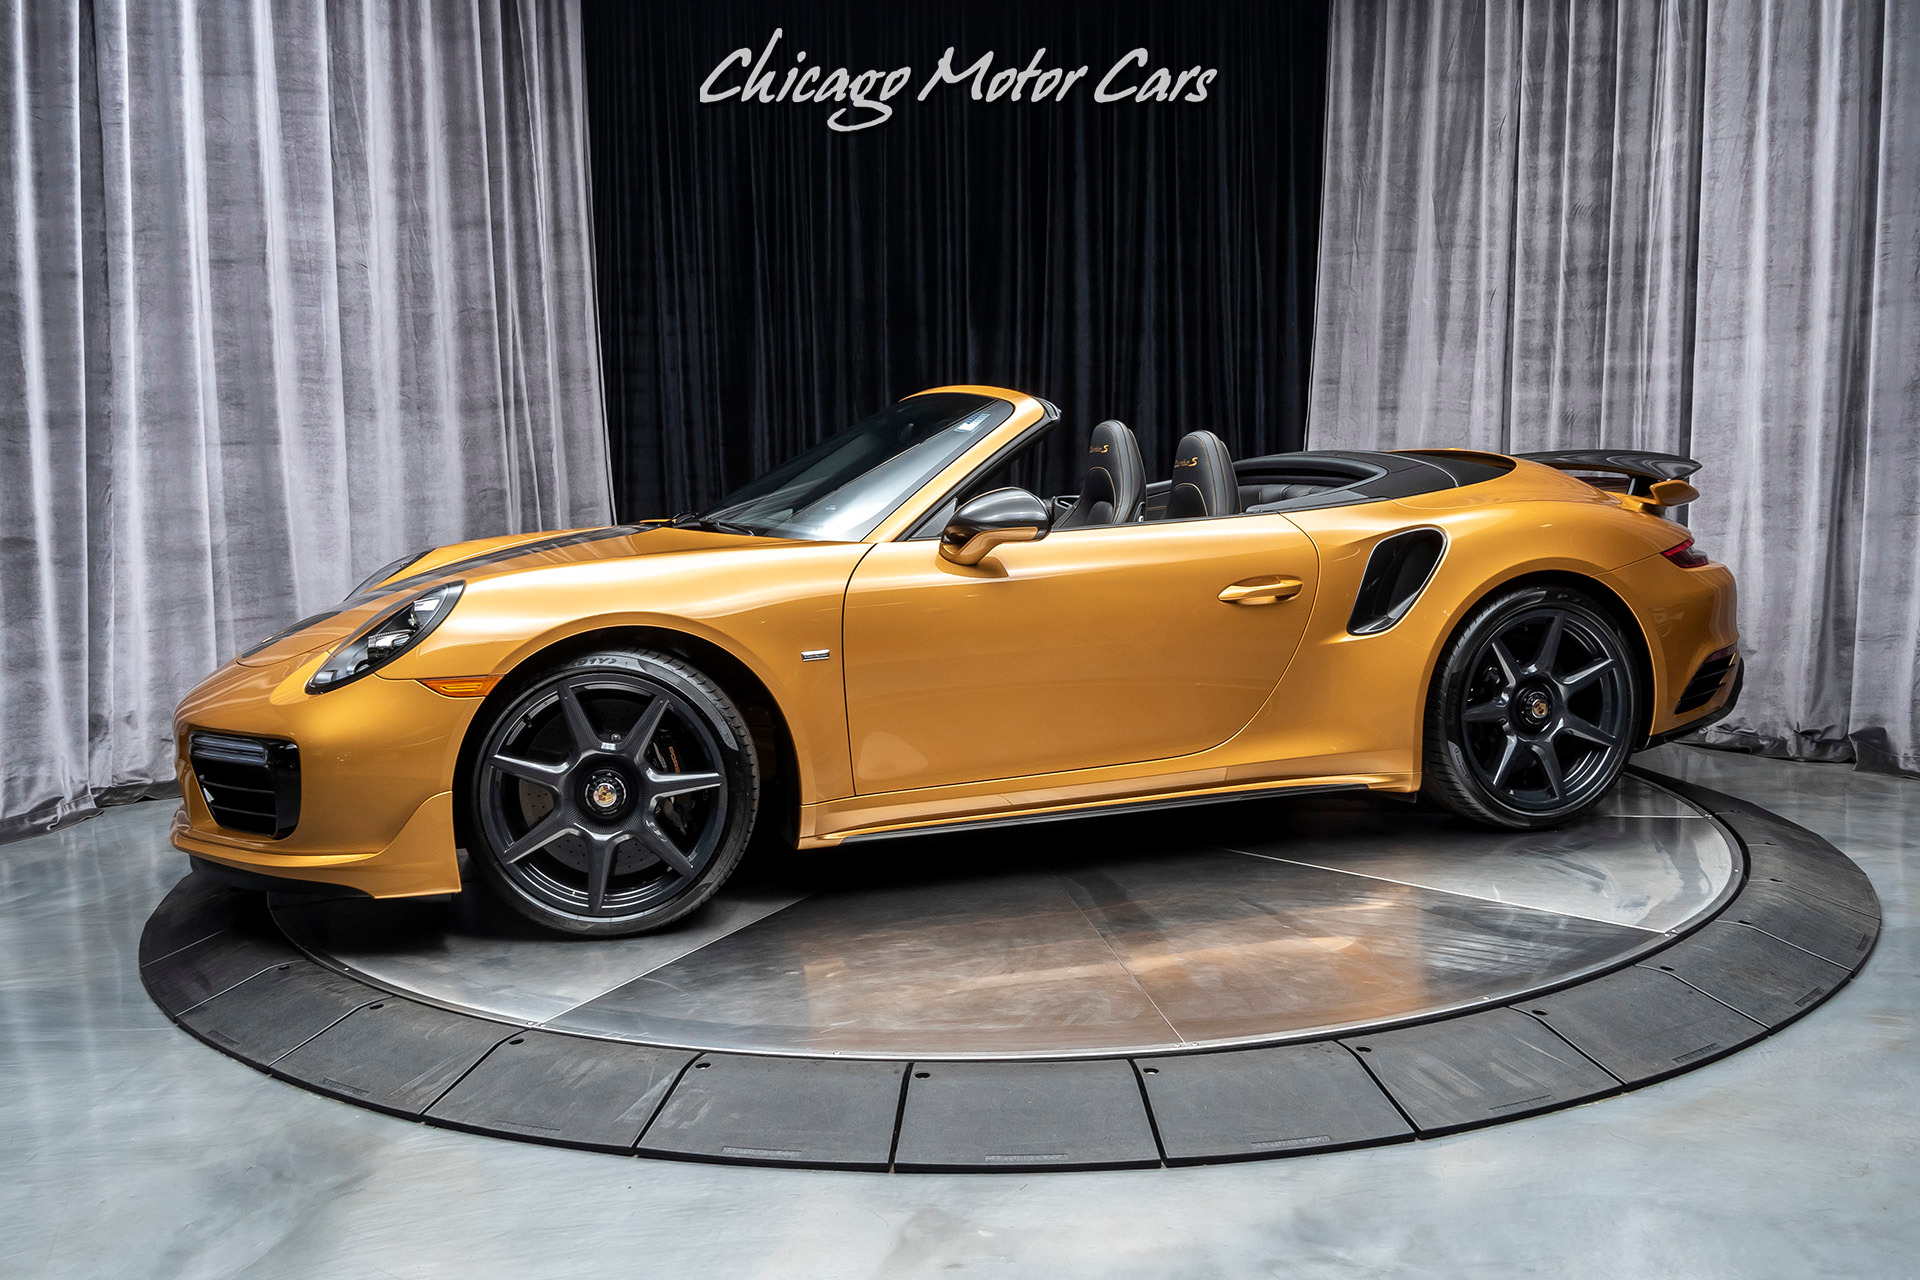 Used-2019-Porsche-911-Turbo-S-Exclusive-Convertible-300-MSRP-Carbon-Fiber-Wheels-RARE-1-of-200